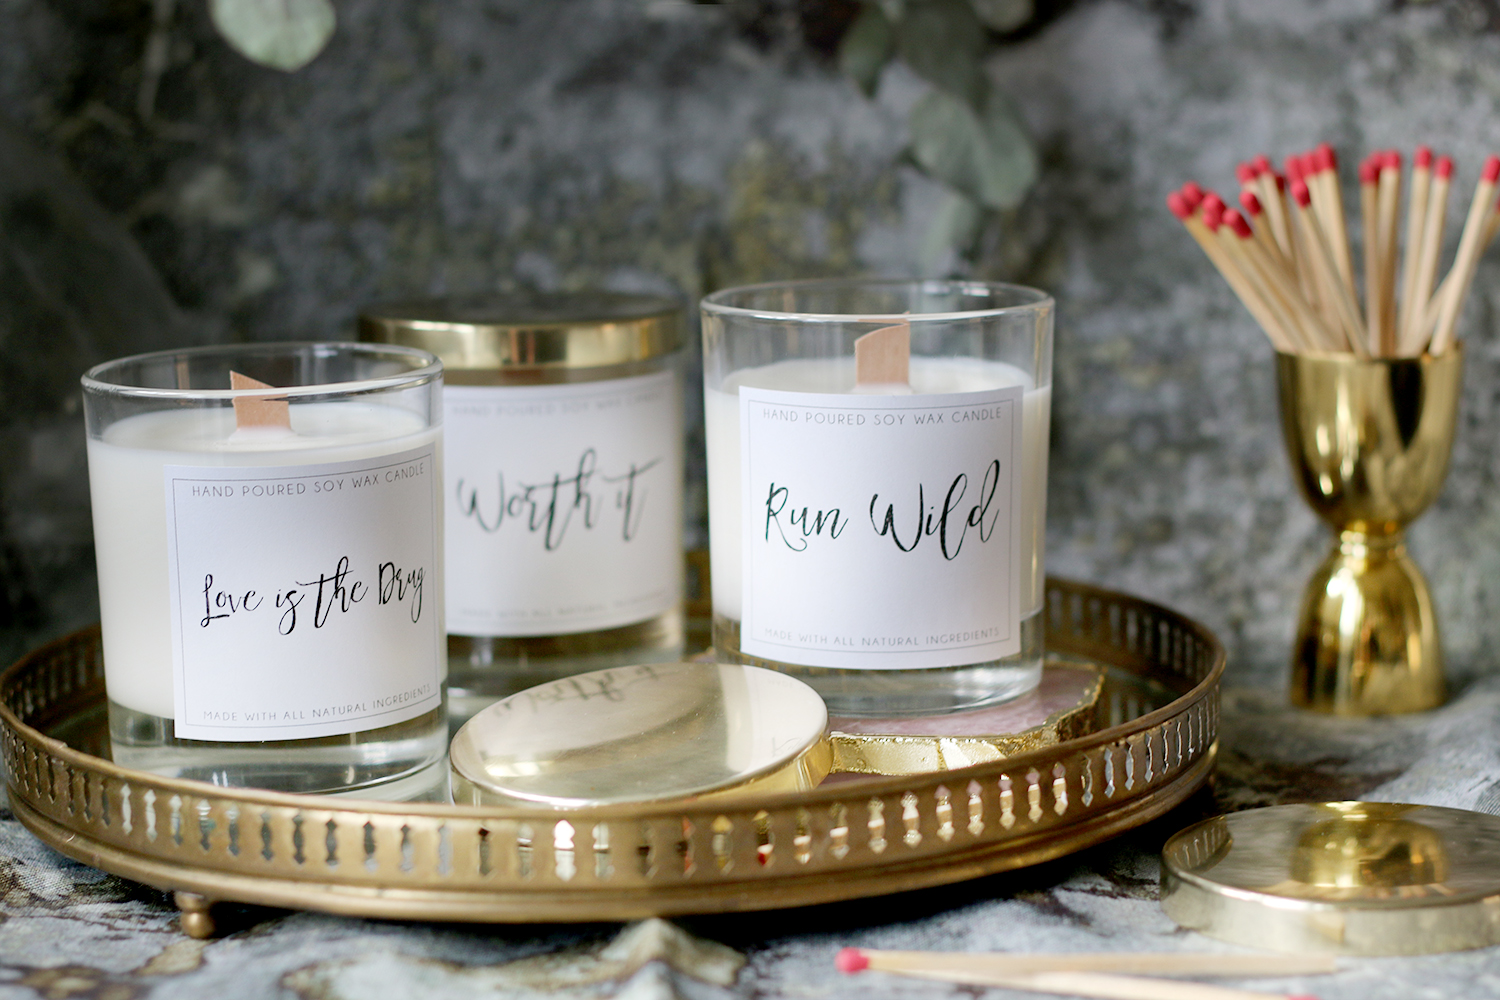 Diy Wood Wick Candles With Soy Wax And Essential Oils Swoon Worthy,Miniature Roses In Containers